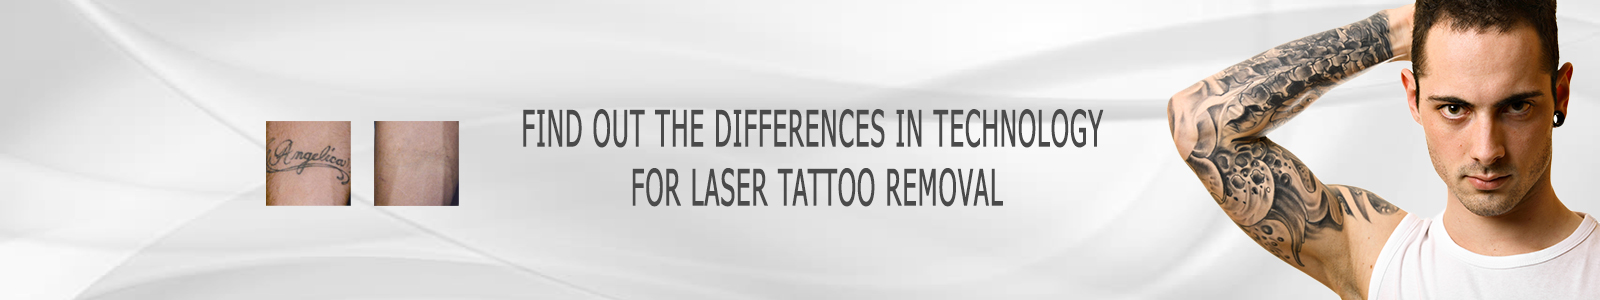 Tattoo Removal Technology